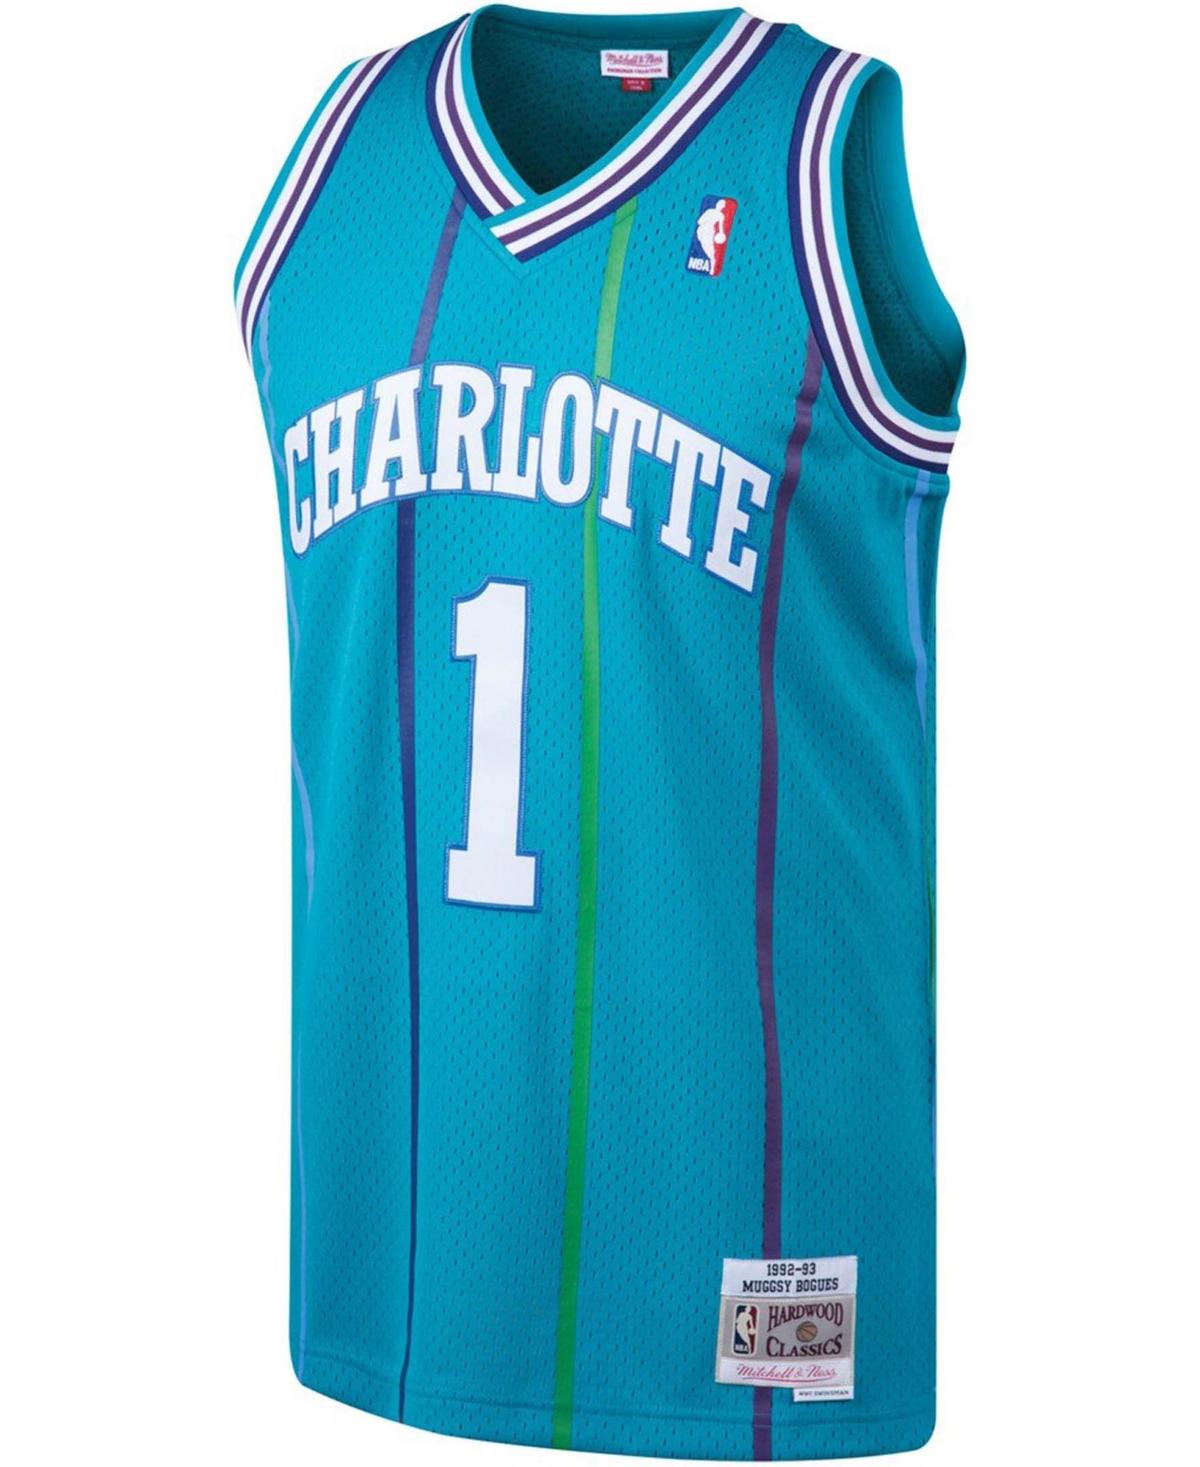 charlotte hornets mitchell and ness shirt